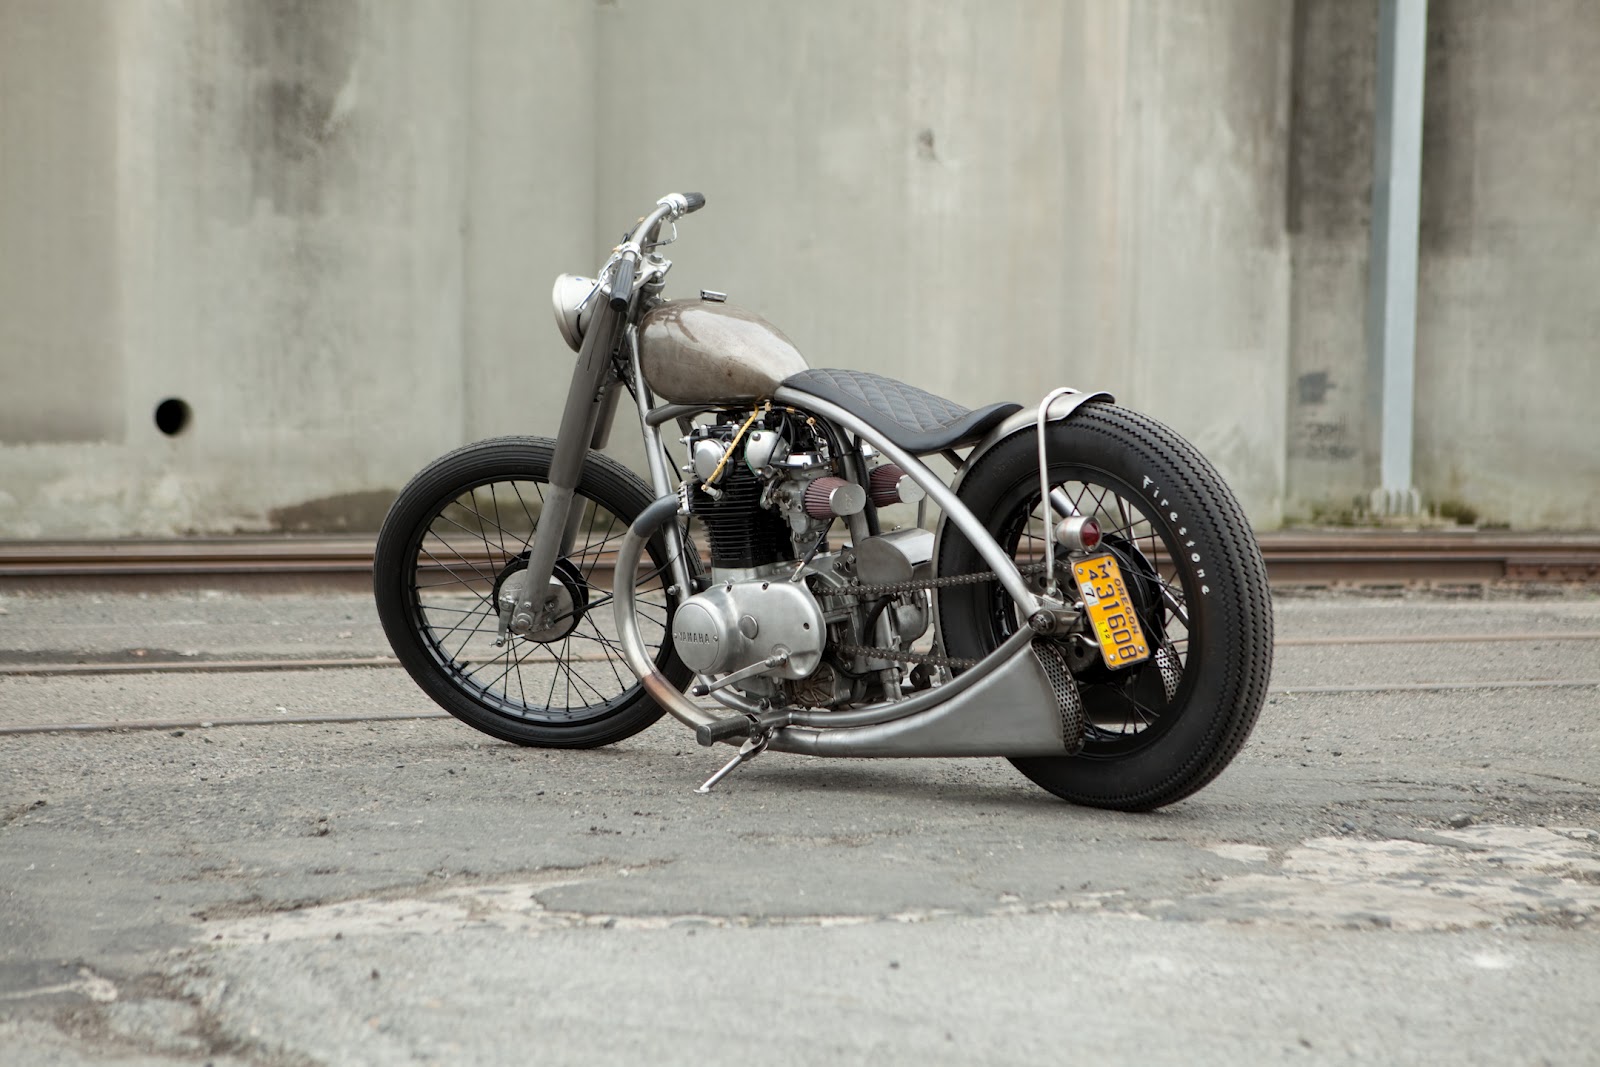 Yamaha Xs650 Bobber By Holiday Customs Return Of The Cafe Racers